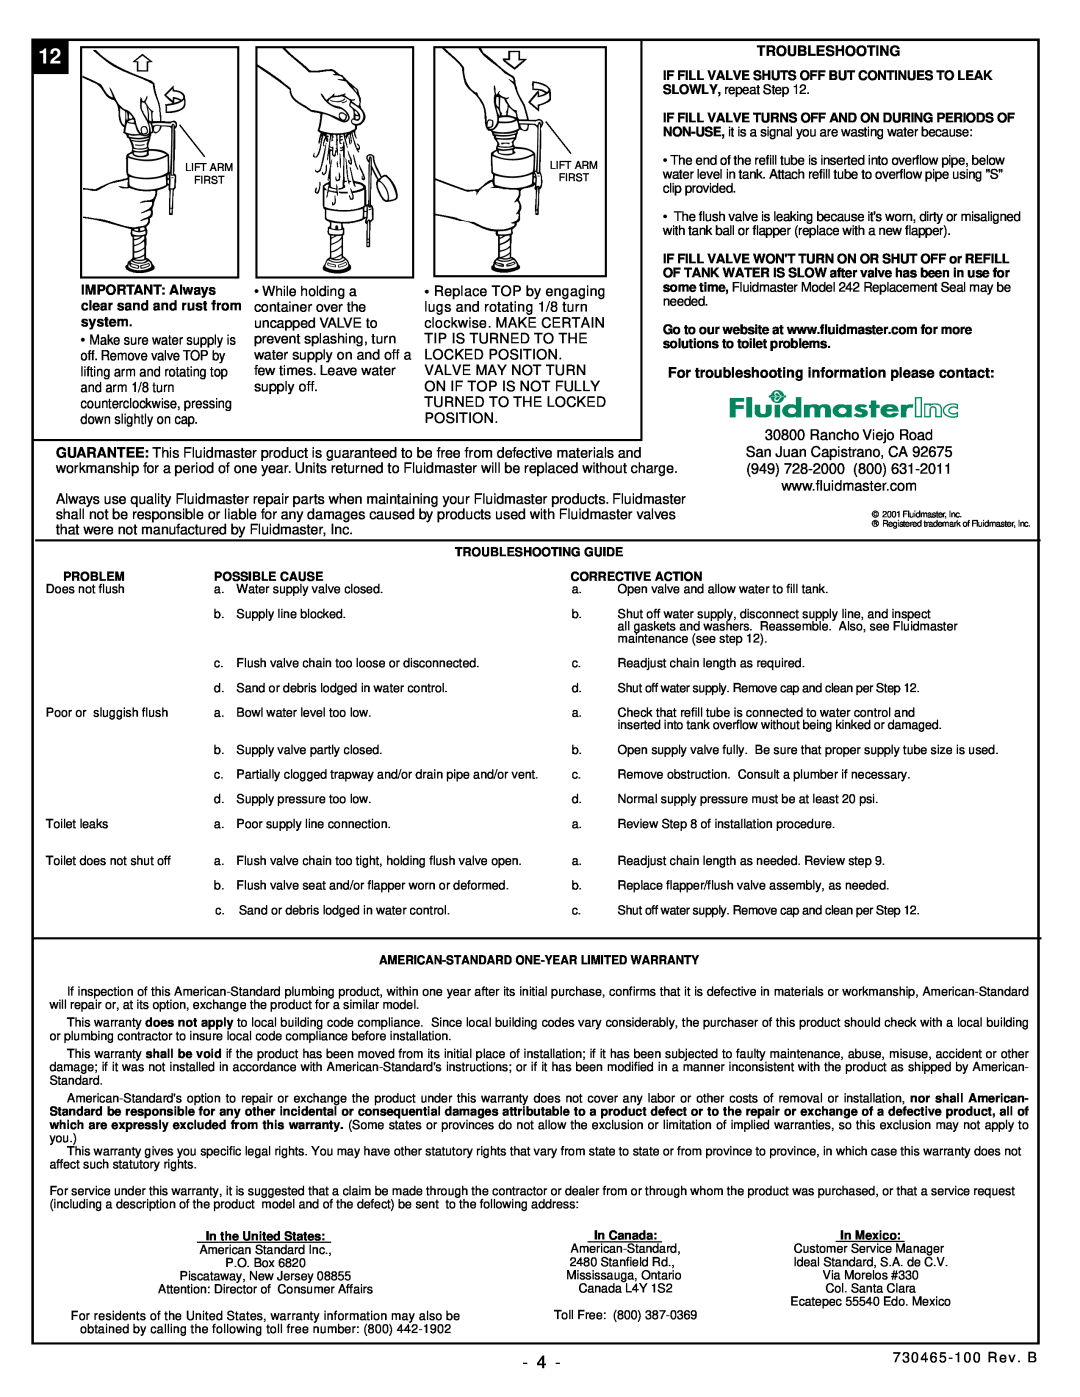 American Standard 2038.016 installation instructions Troubleshooting, For troubleshooting information please contact 